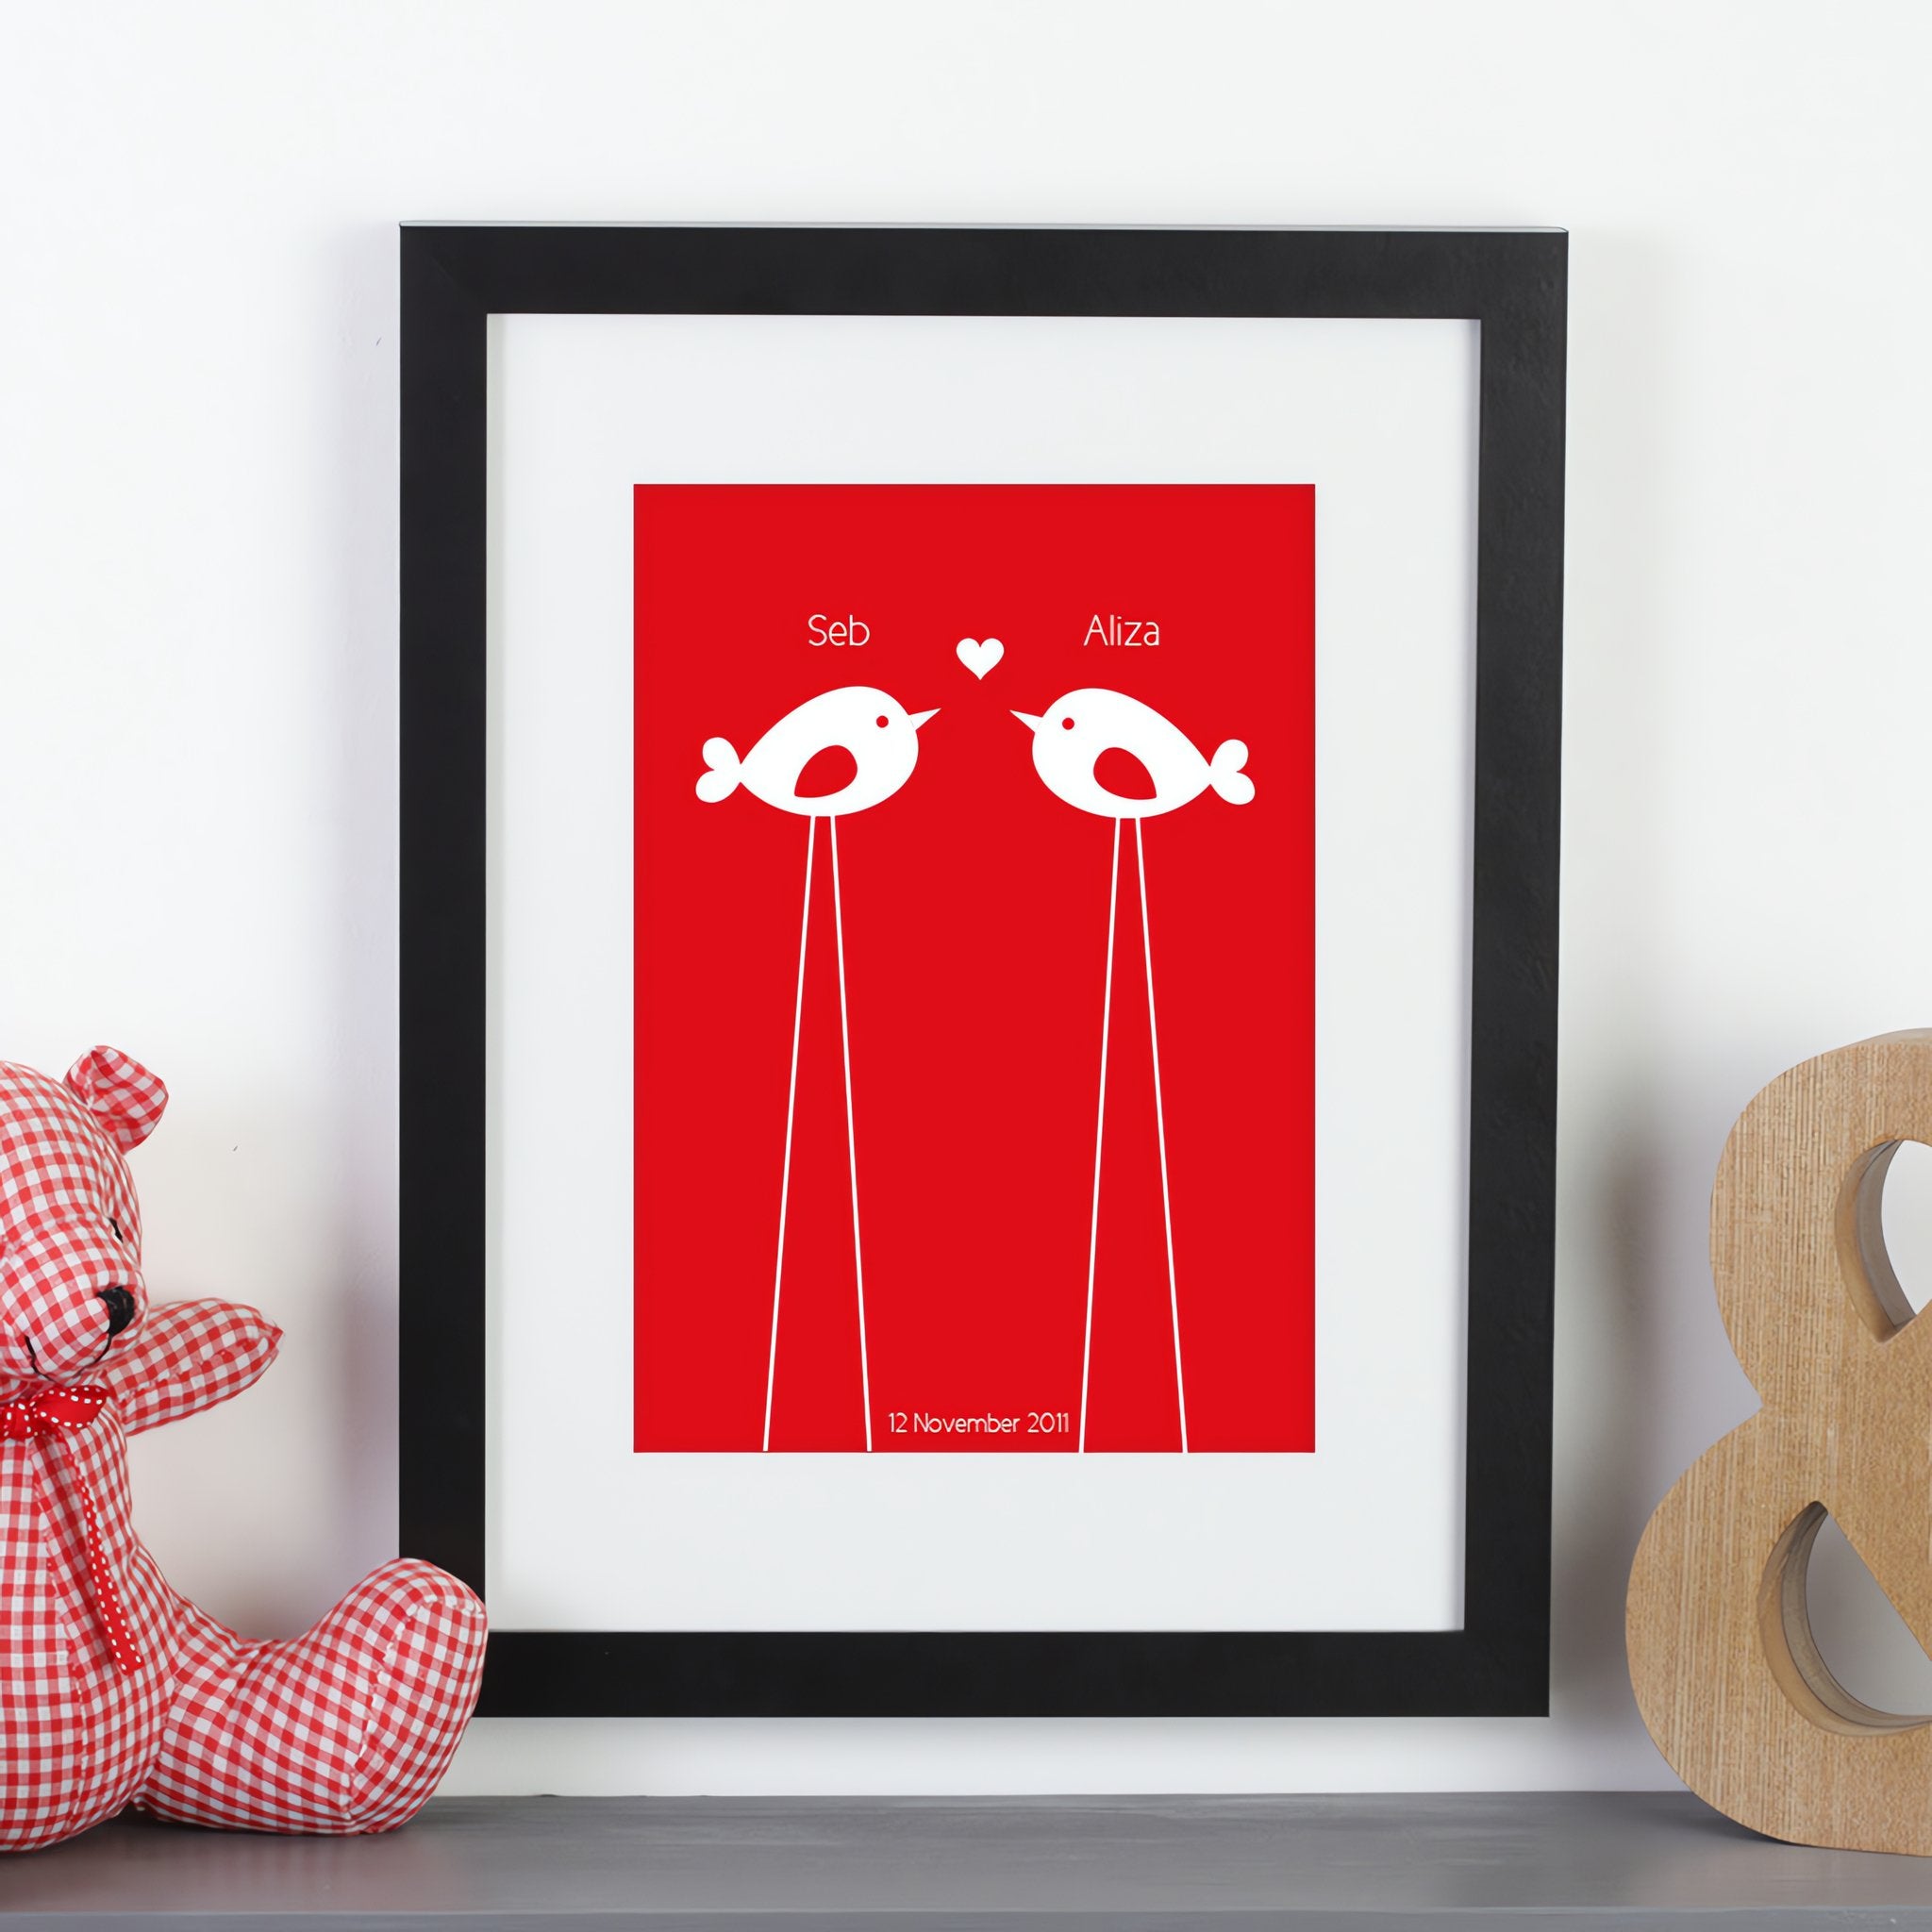 Personalized framed print with 2 birds with names and a date next to a teddy bear.